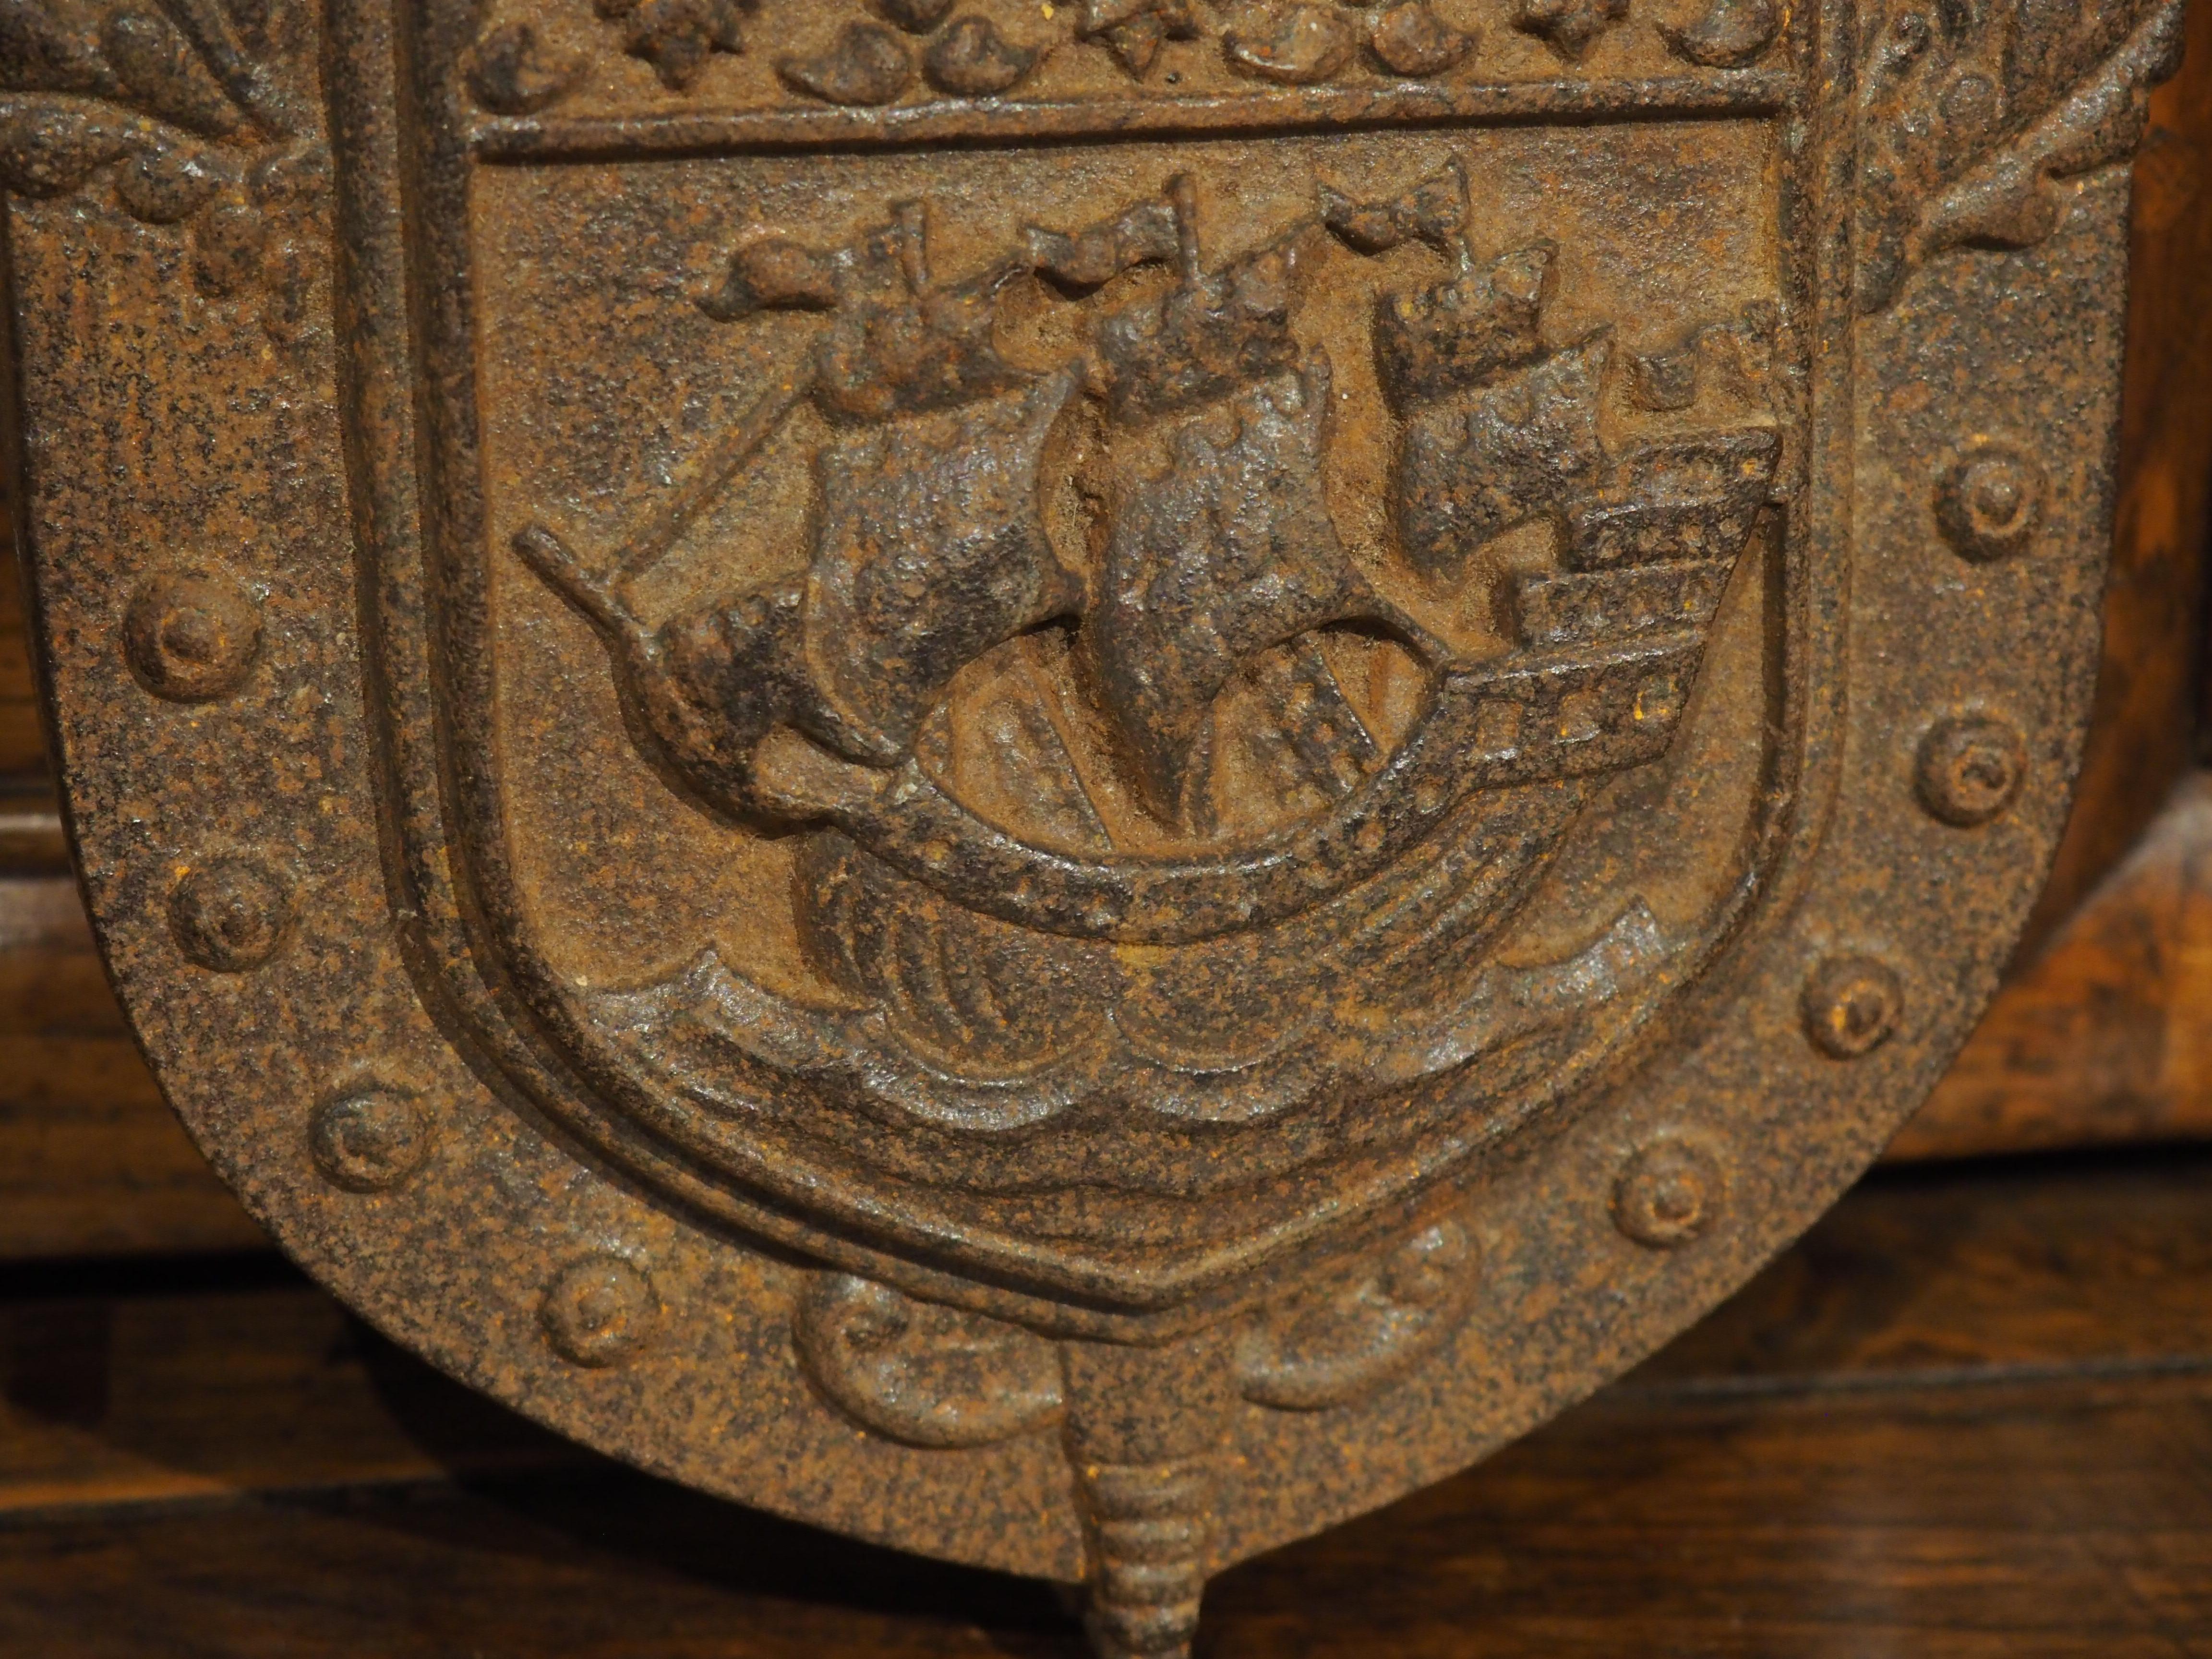 With its thick relief elements, this small cast iron wall plaque depicts the coat of arms of Paris beneath a plumed great helm. Dating to the 1900s, the plaque has a deep brown finish with some areas containing orange oxidation. The knight helmet is